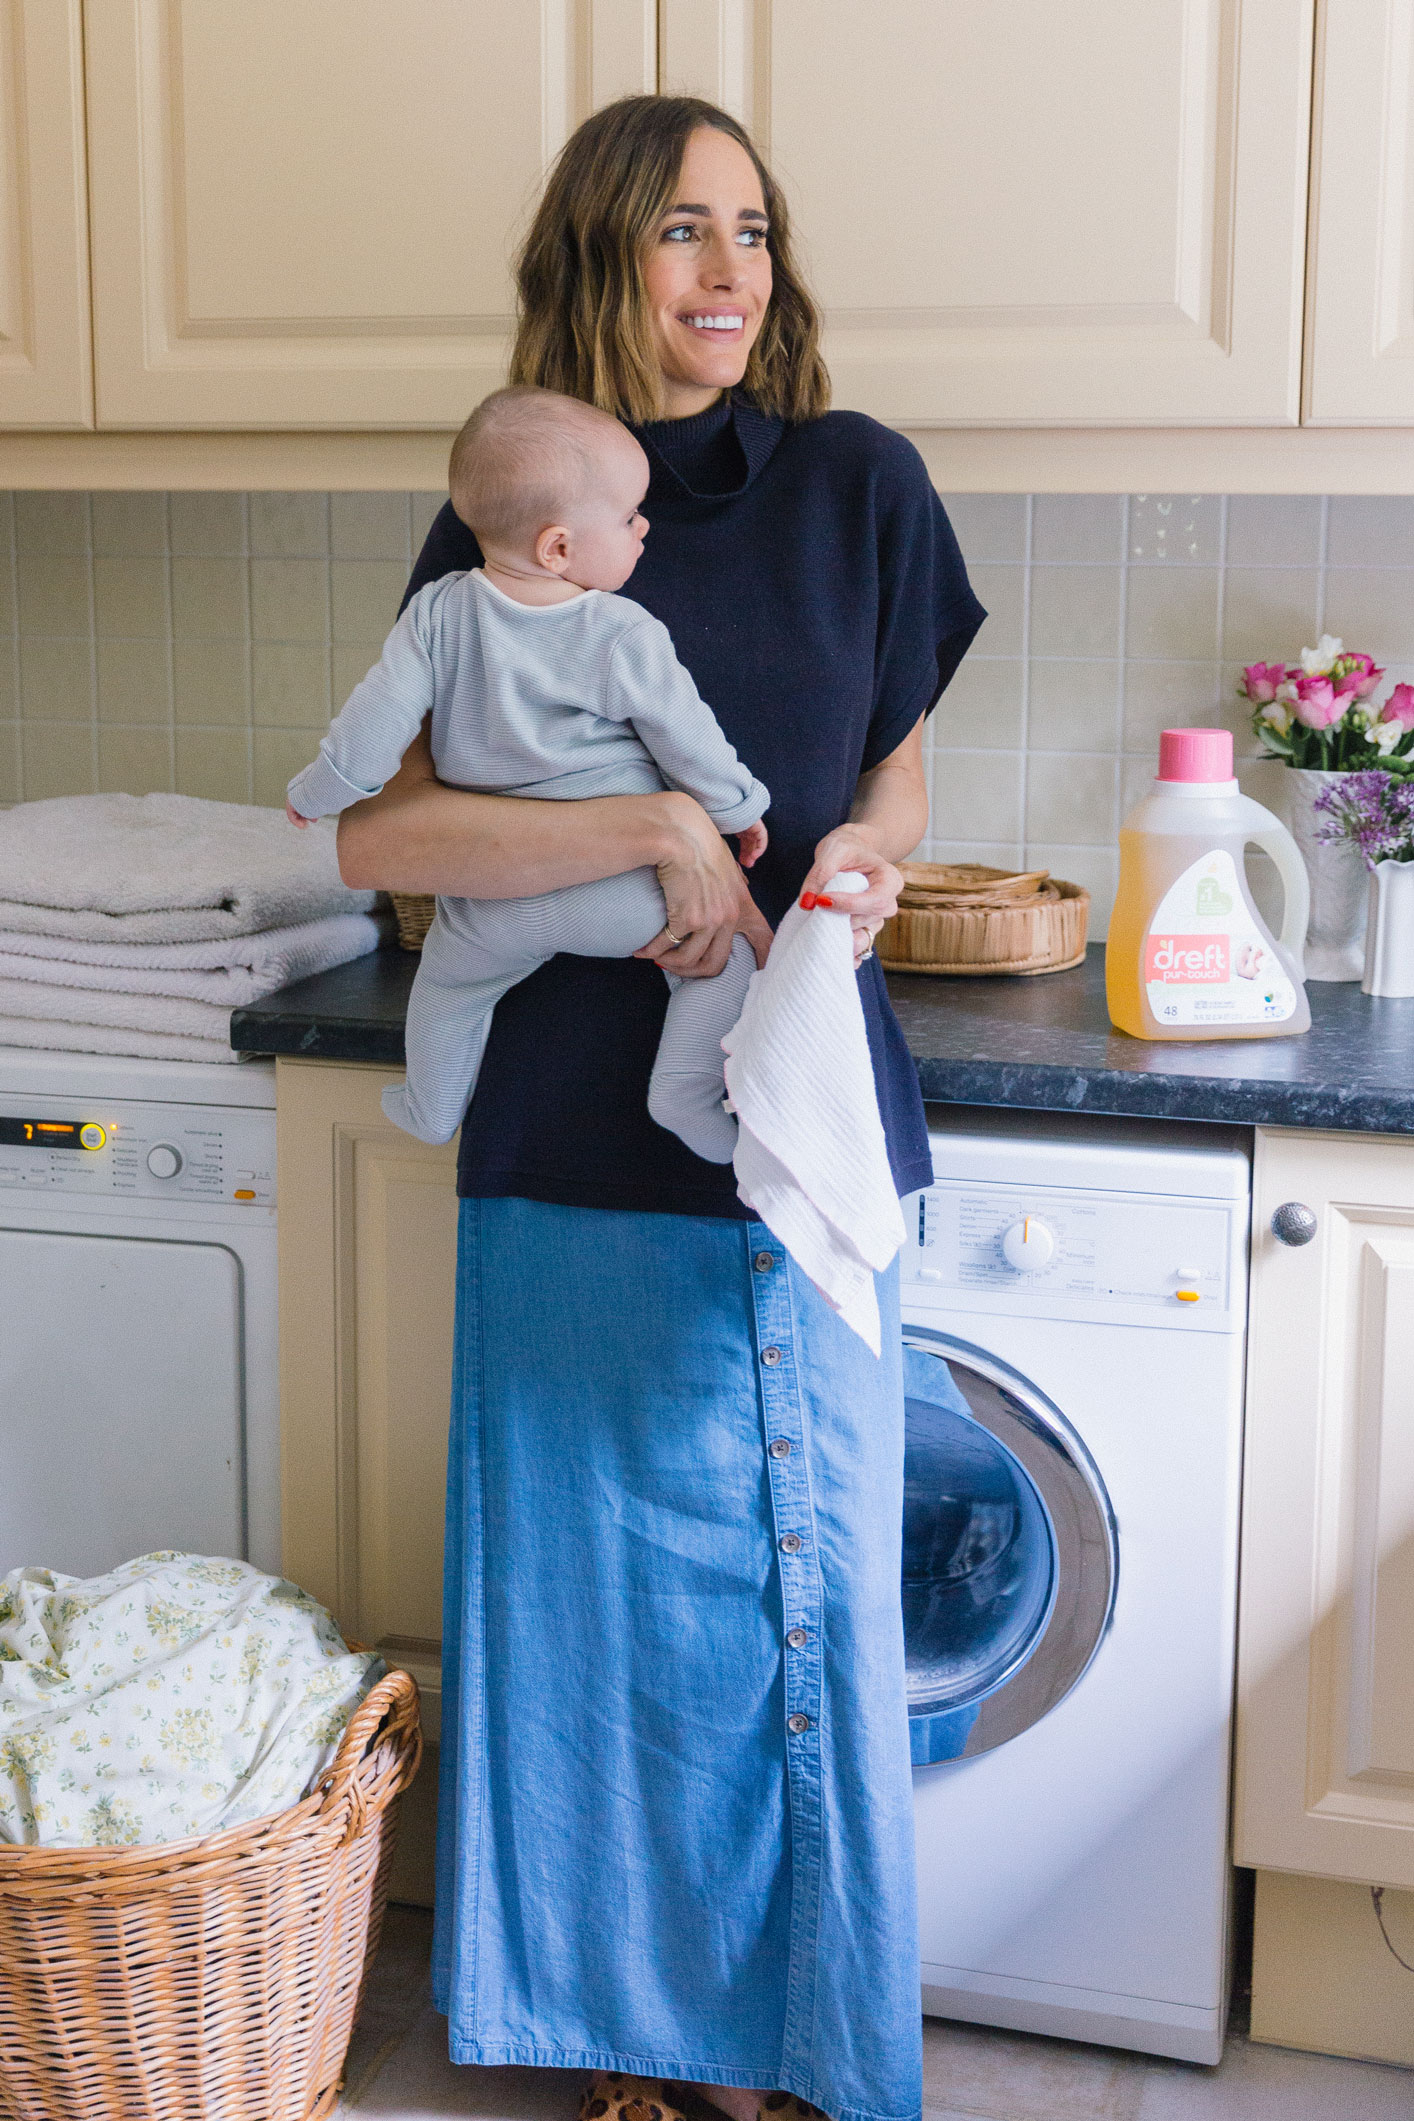 Louise Roe Baby Scent and Motherhood Tips With Dreft Detergent